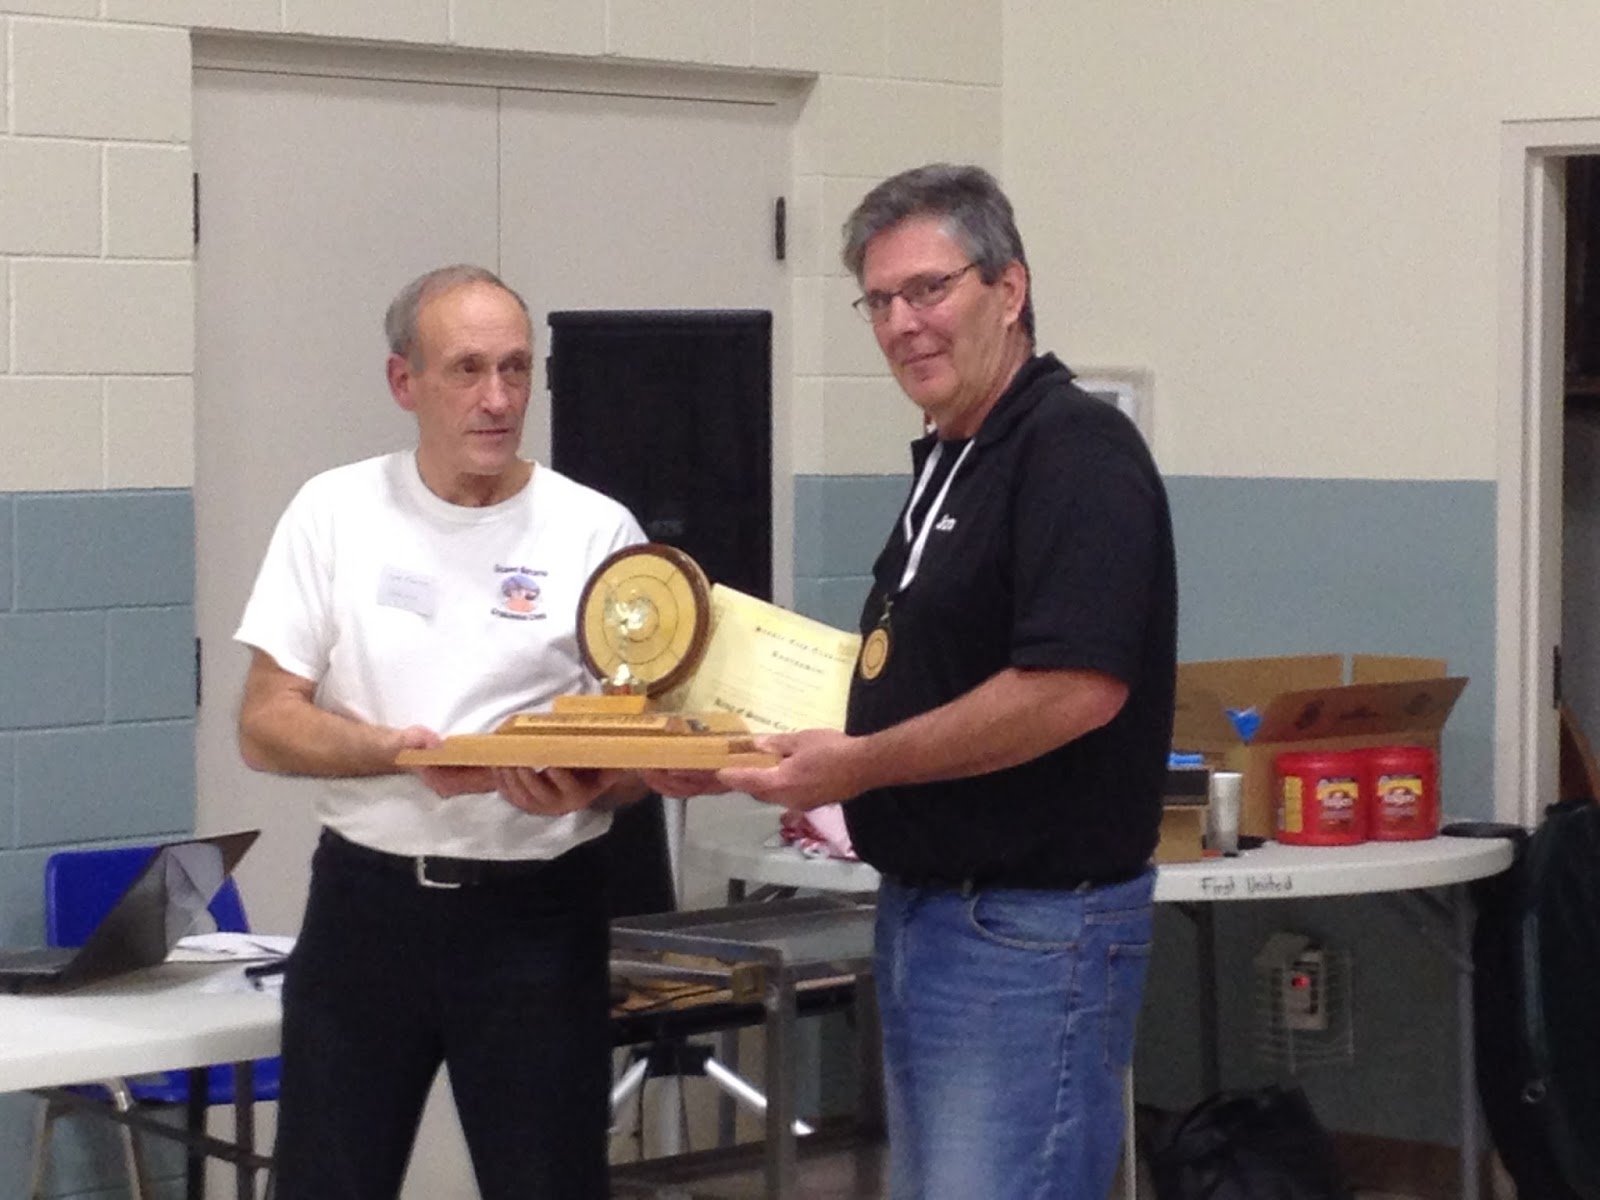 Jon Conrad (right) accepts the trophy from tournament organizer Clare Kuepfer as 2016 Scenic City King of Crokinole